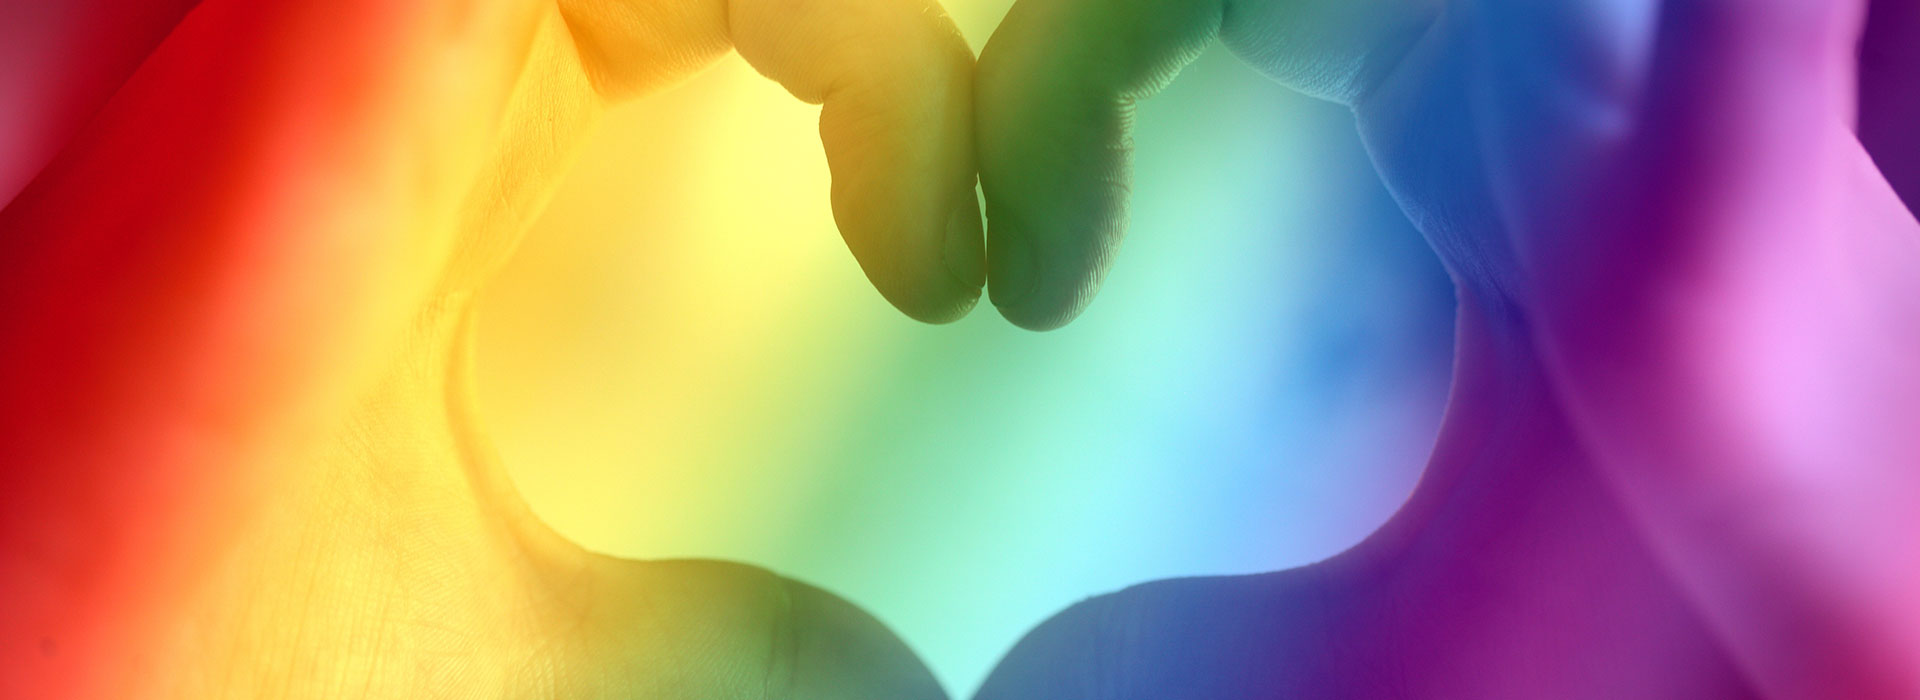 hands form a heart over a rainbow background